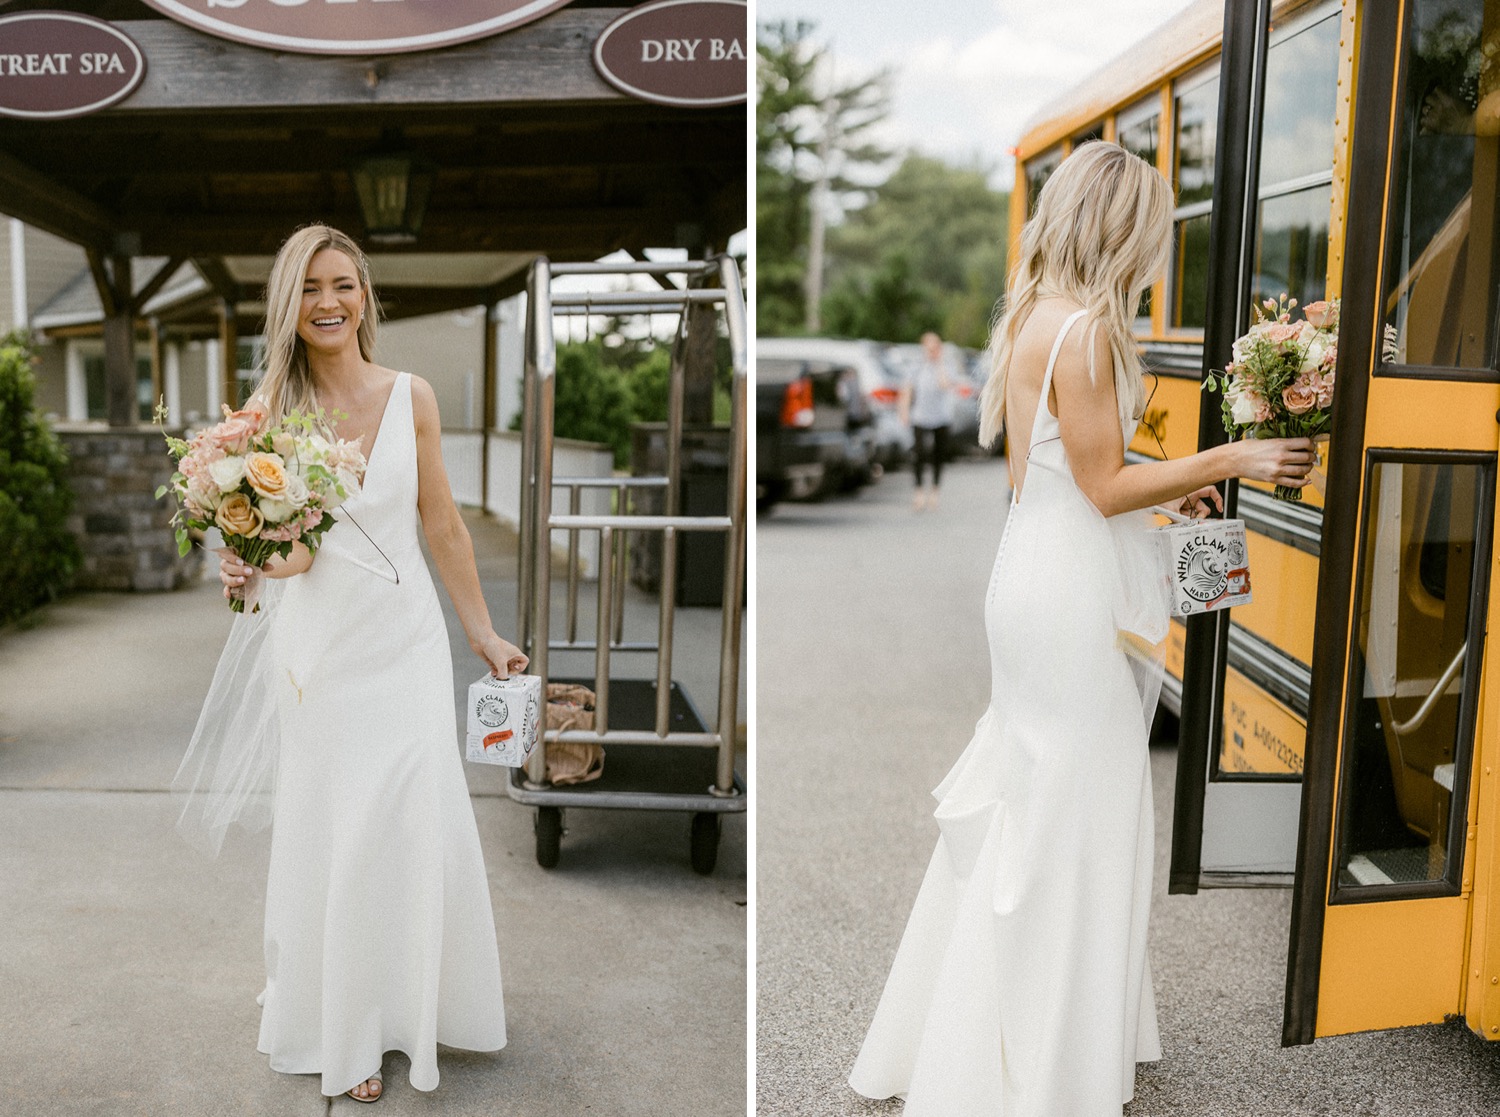 bride carrying white claw and bouquet getting on school bus